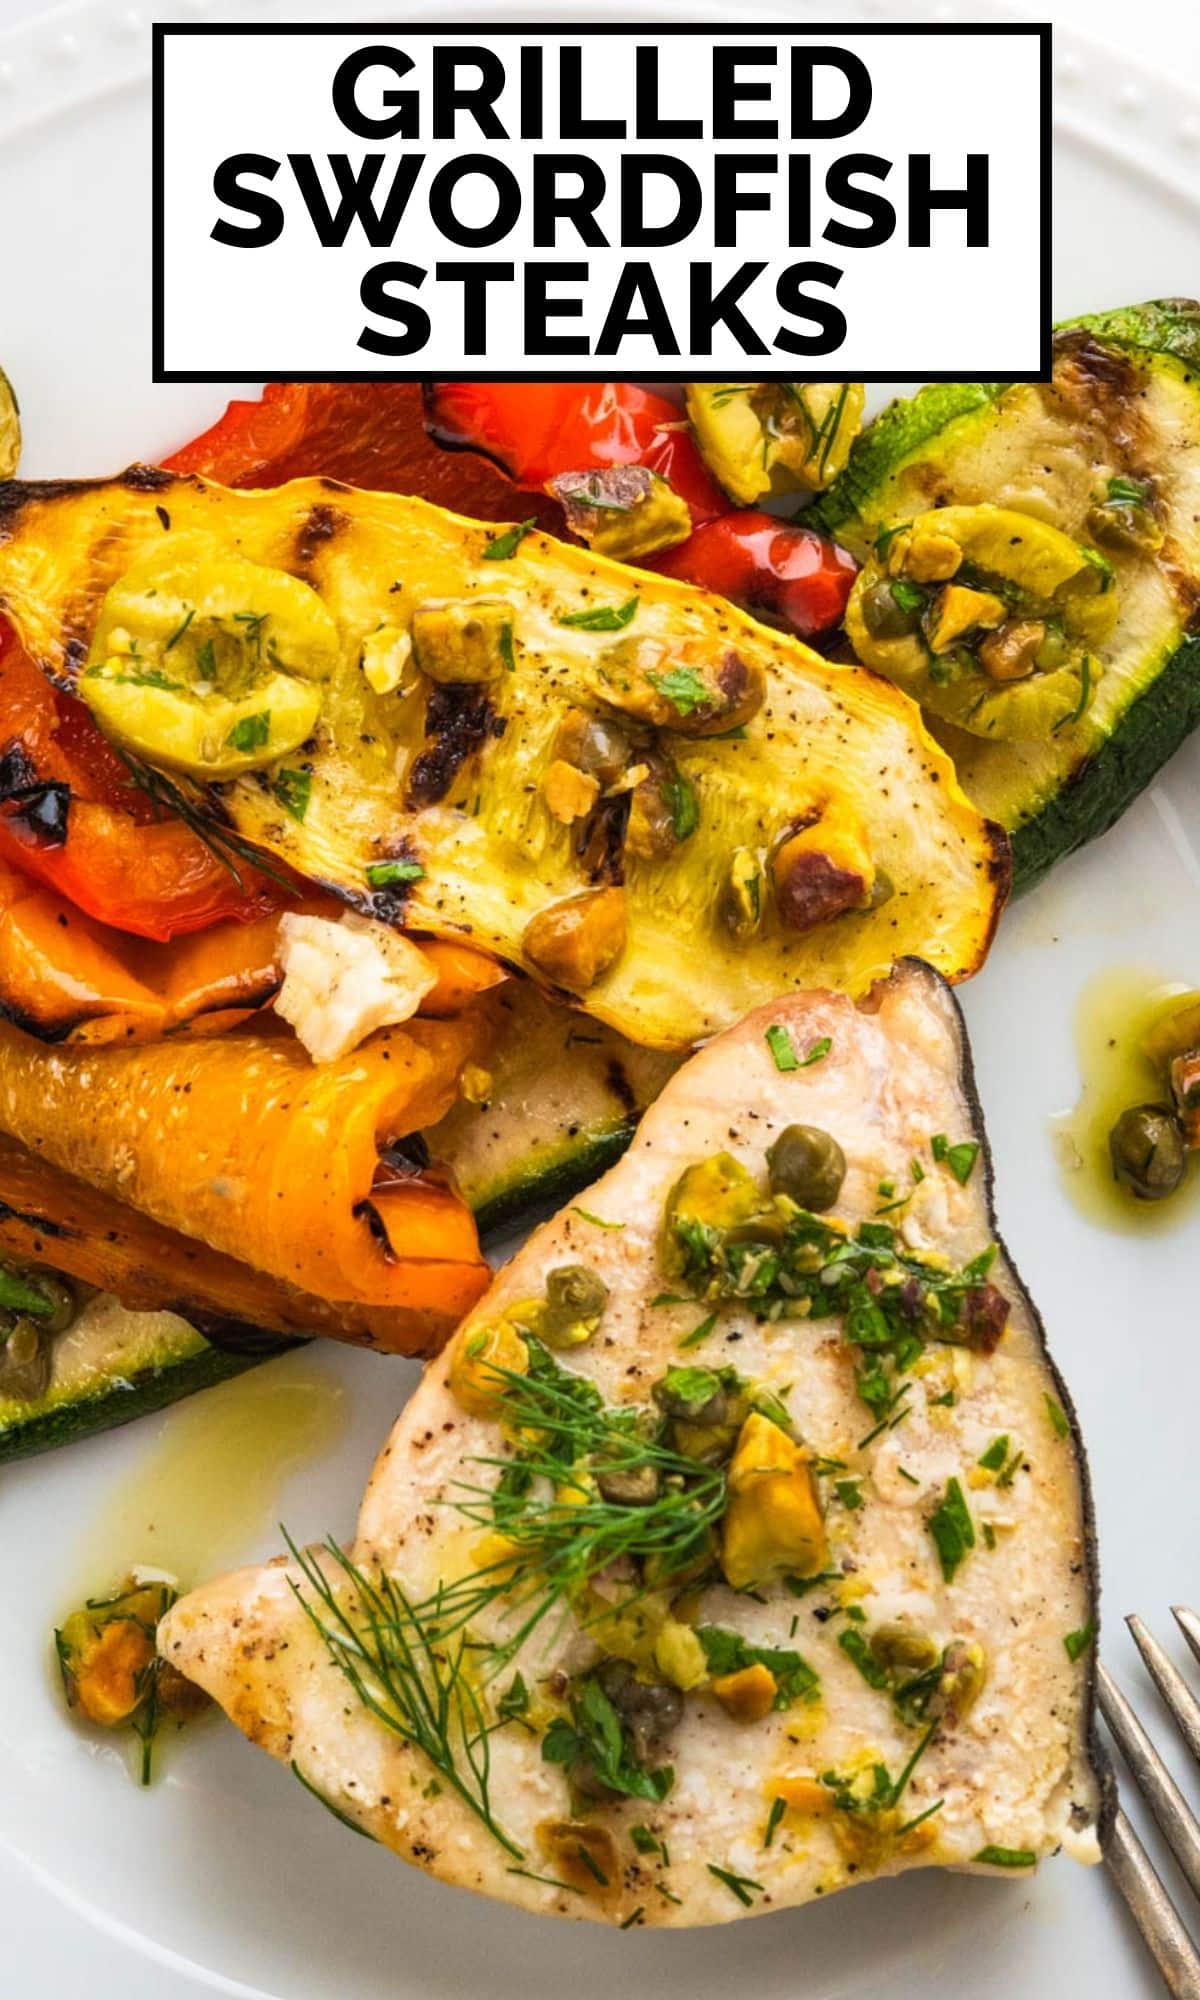 A Pinterest Pin of Grilled swordfish steaks with olive relish ad grilled vegetables on a plate.